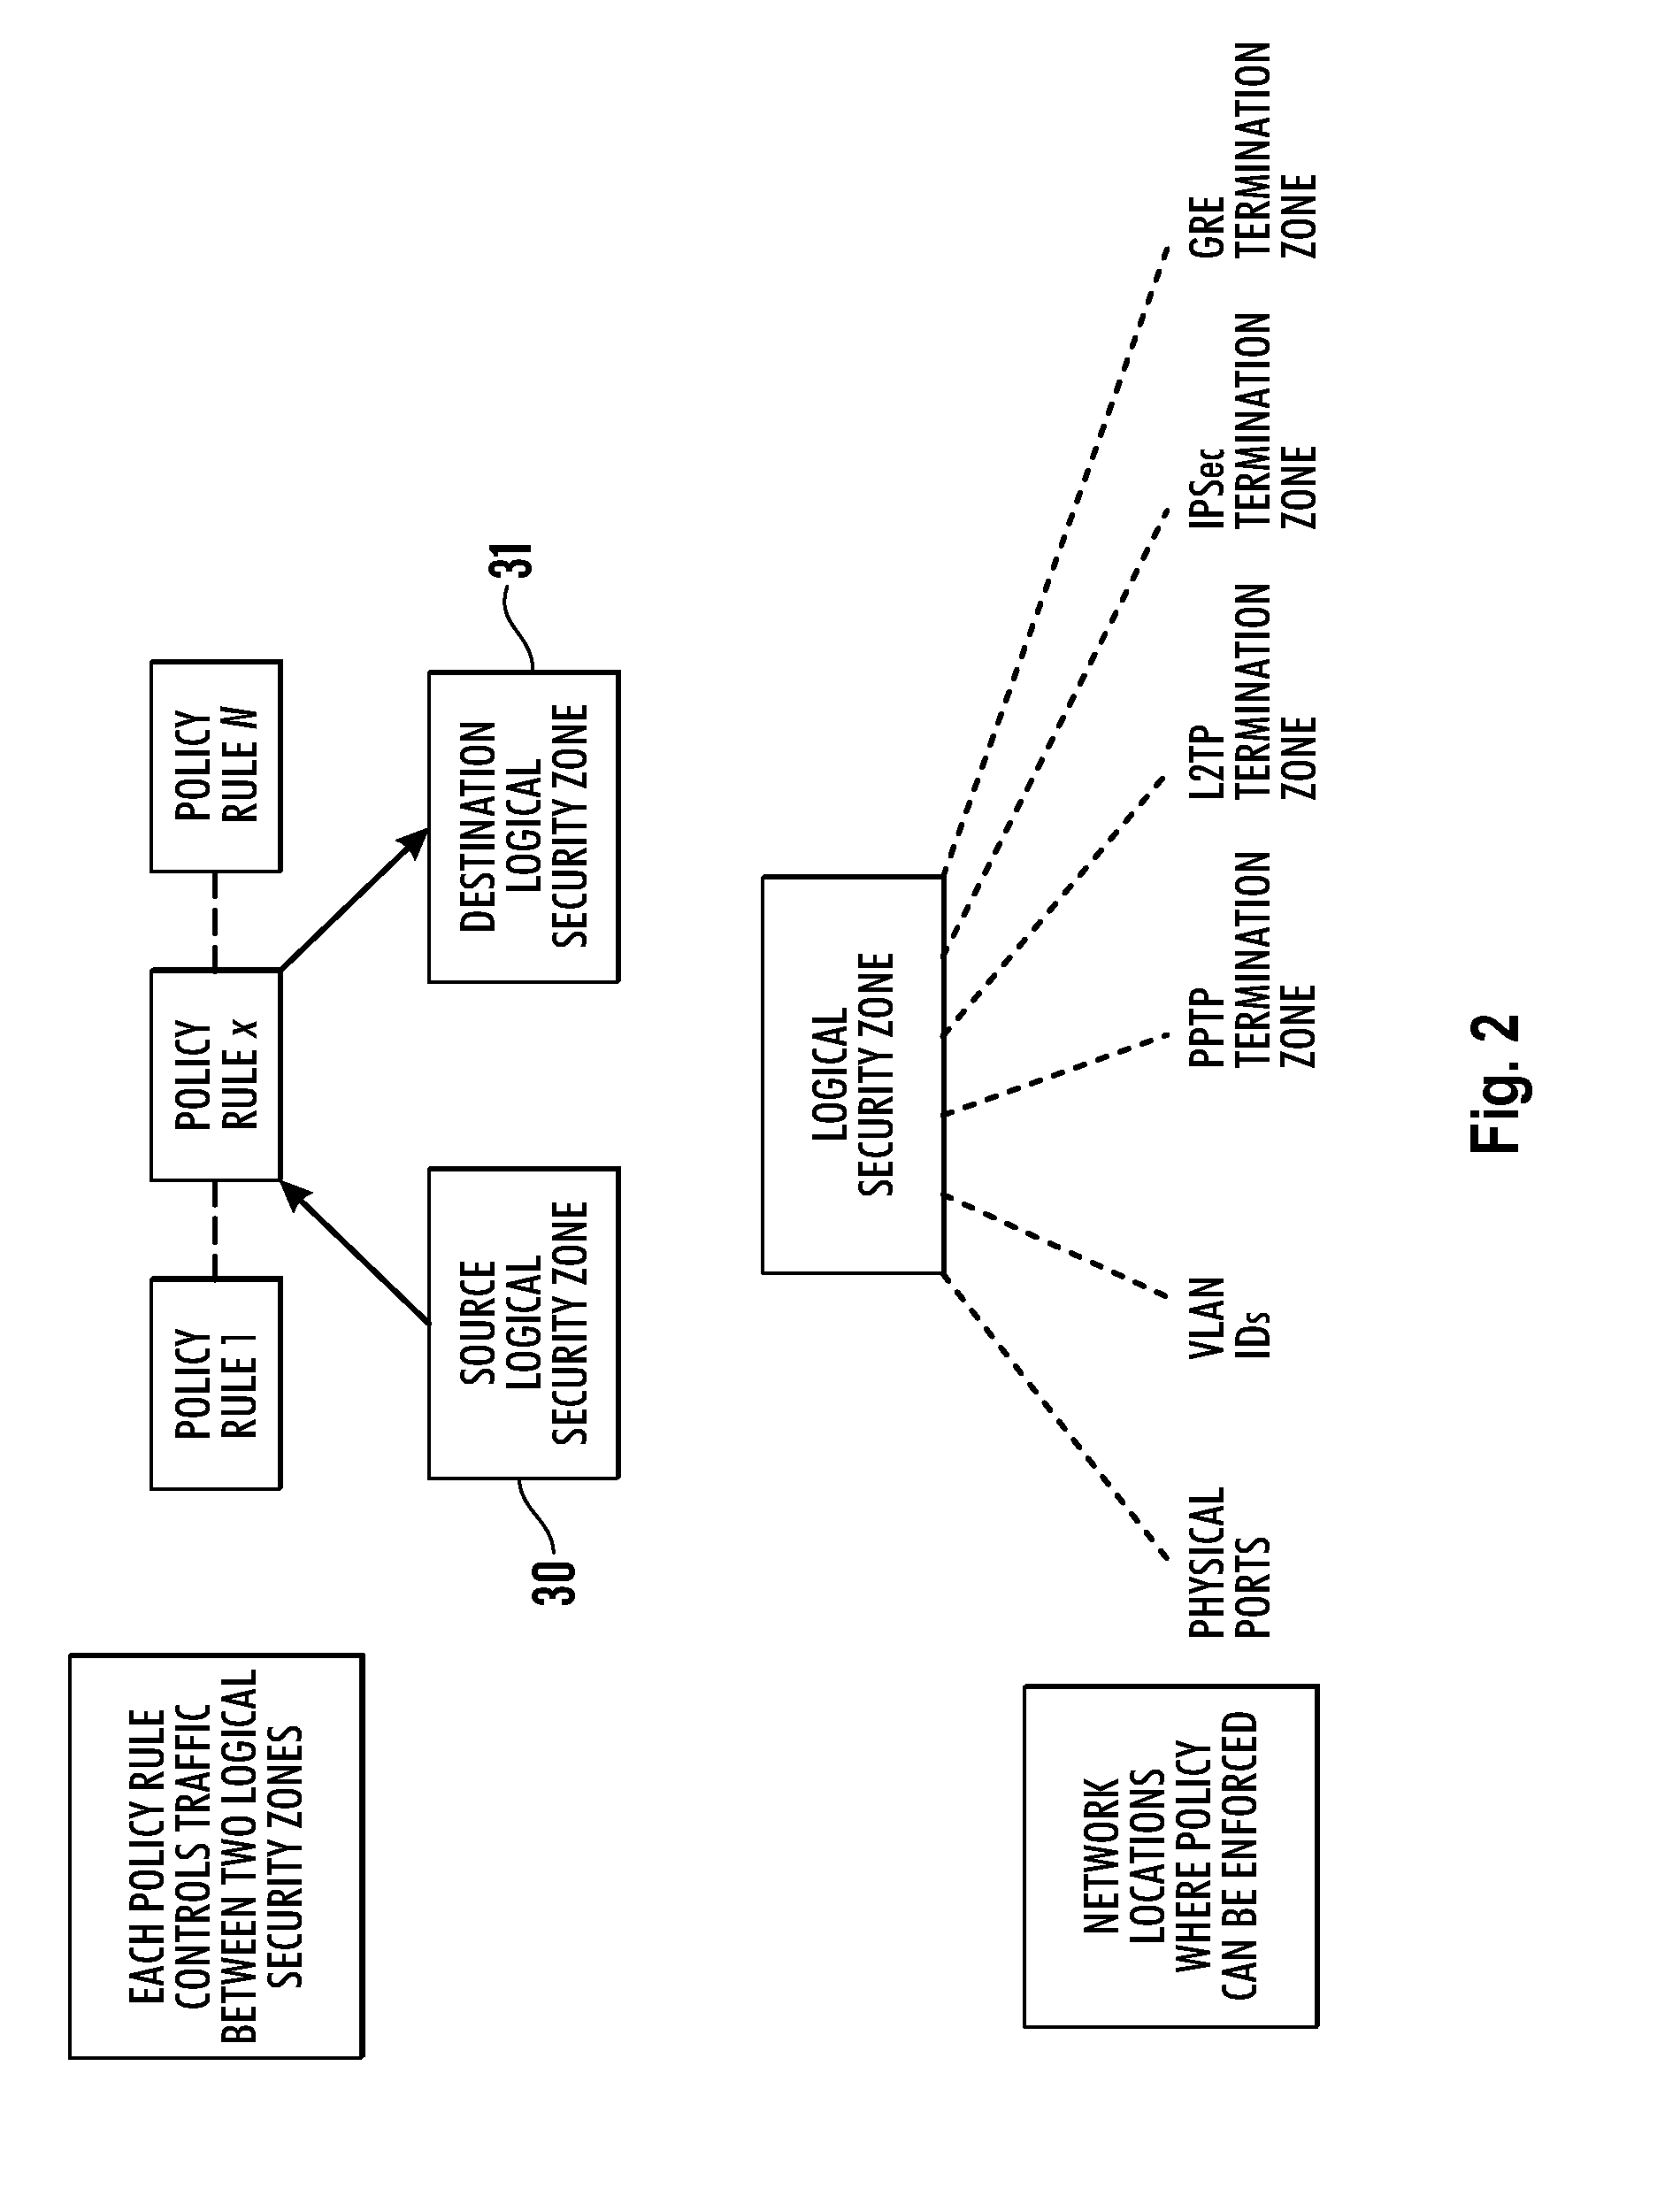 Method and apparatus for controlling traffic between different entities on a network